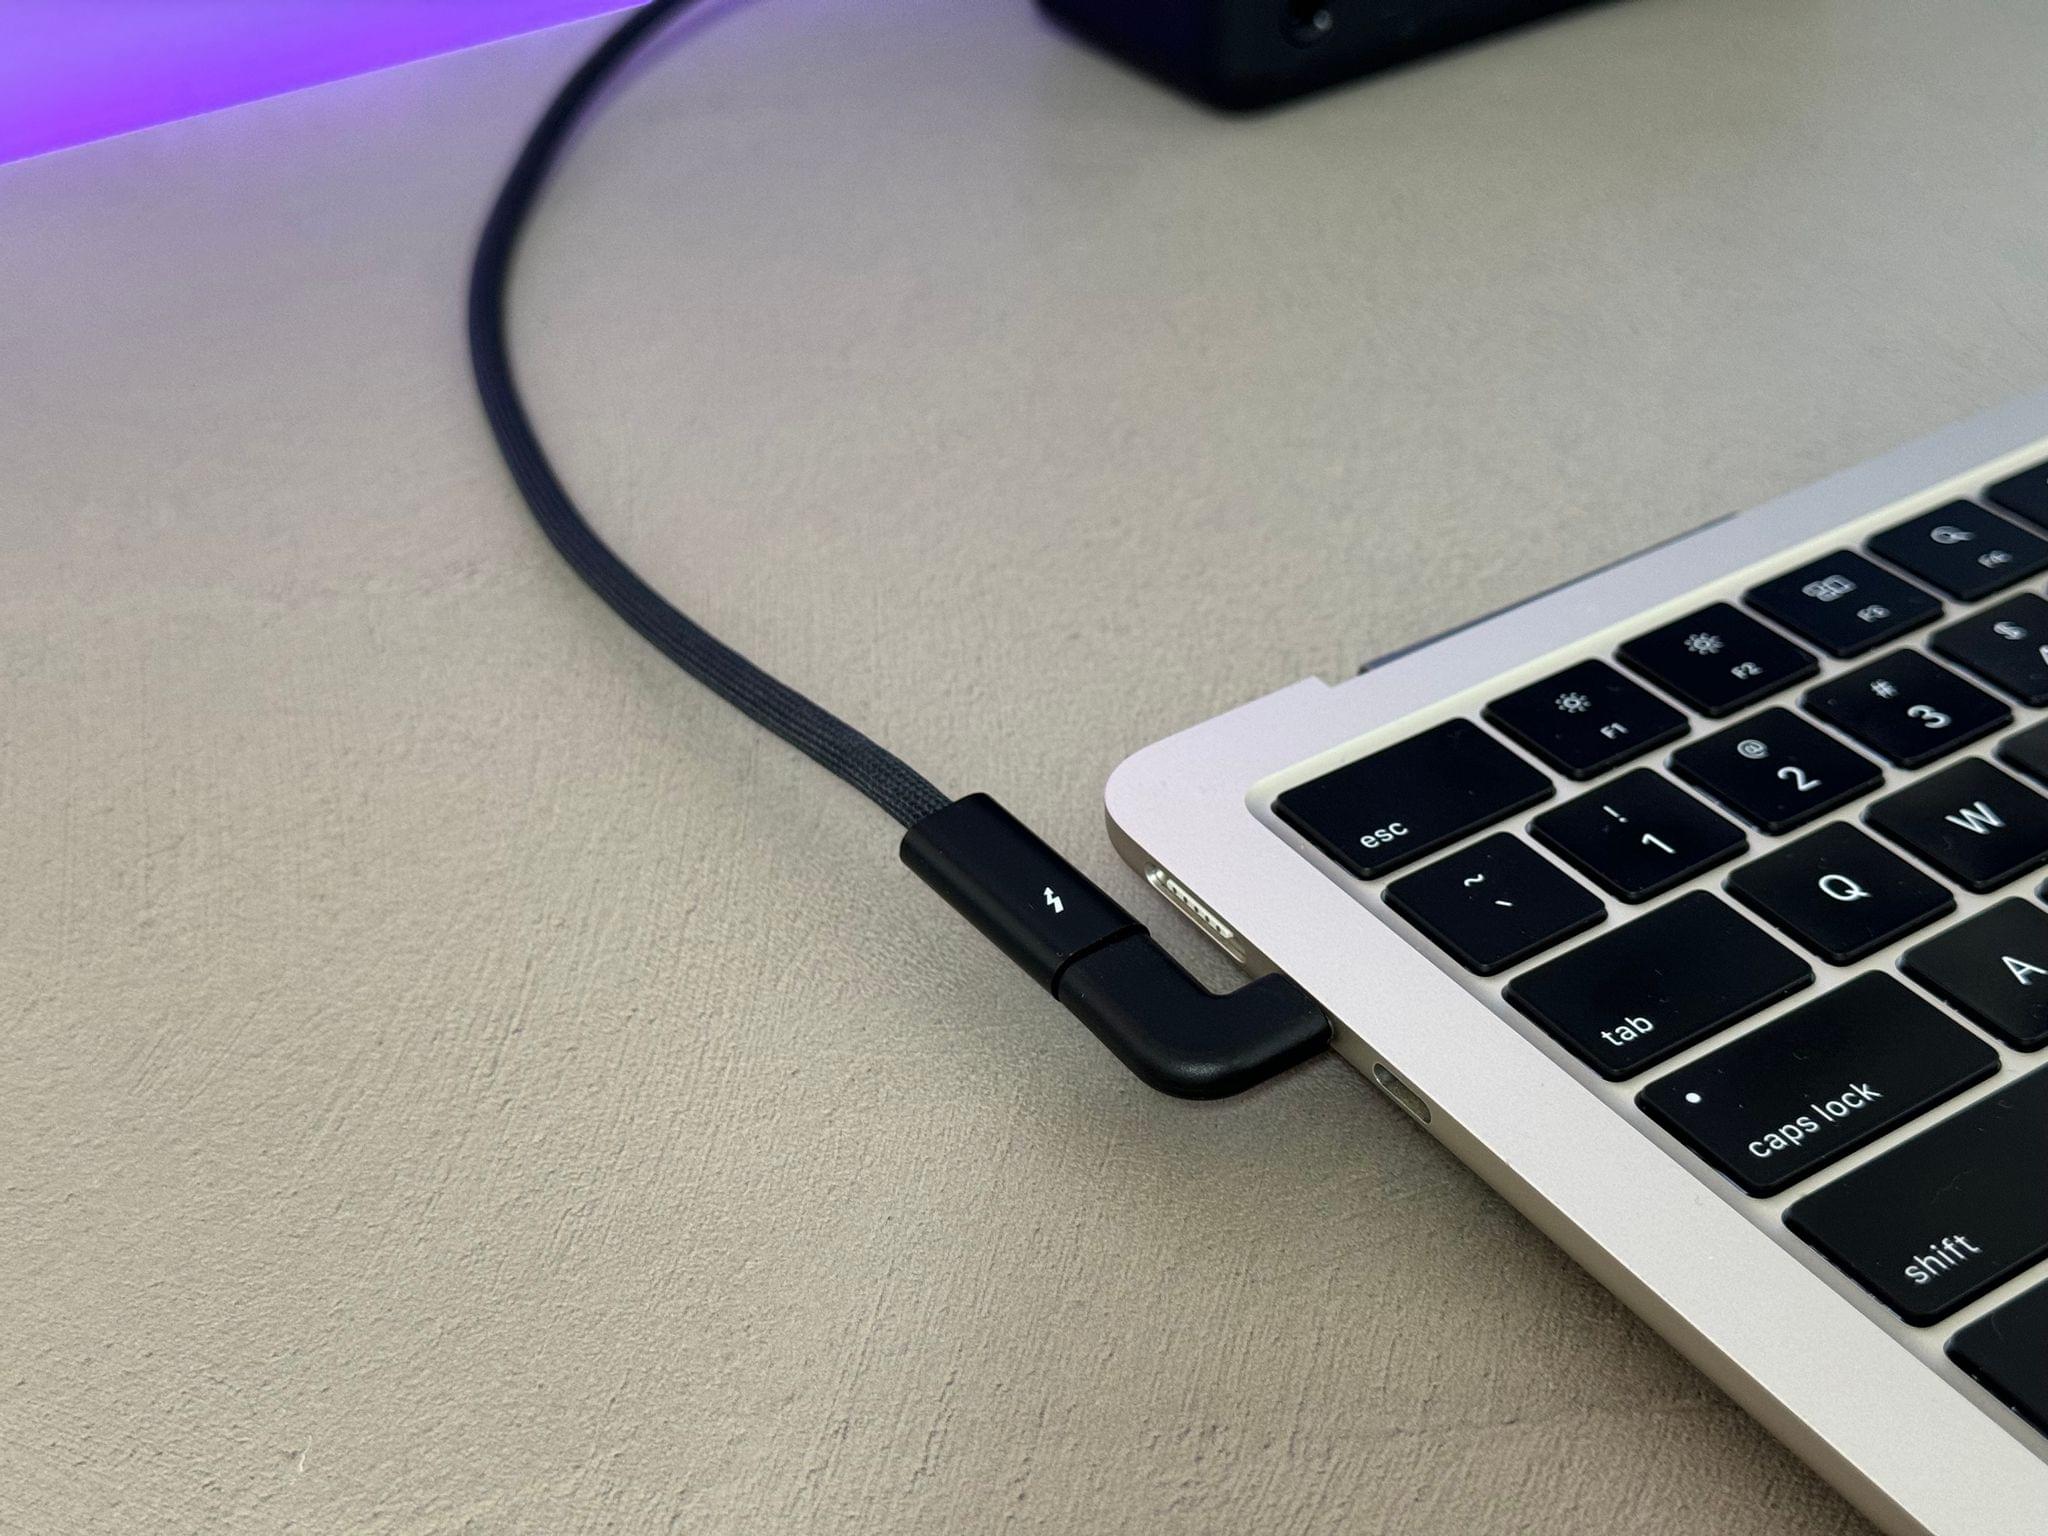 The angled connector lets the Thunderbolt cable remain straight.